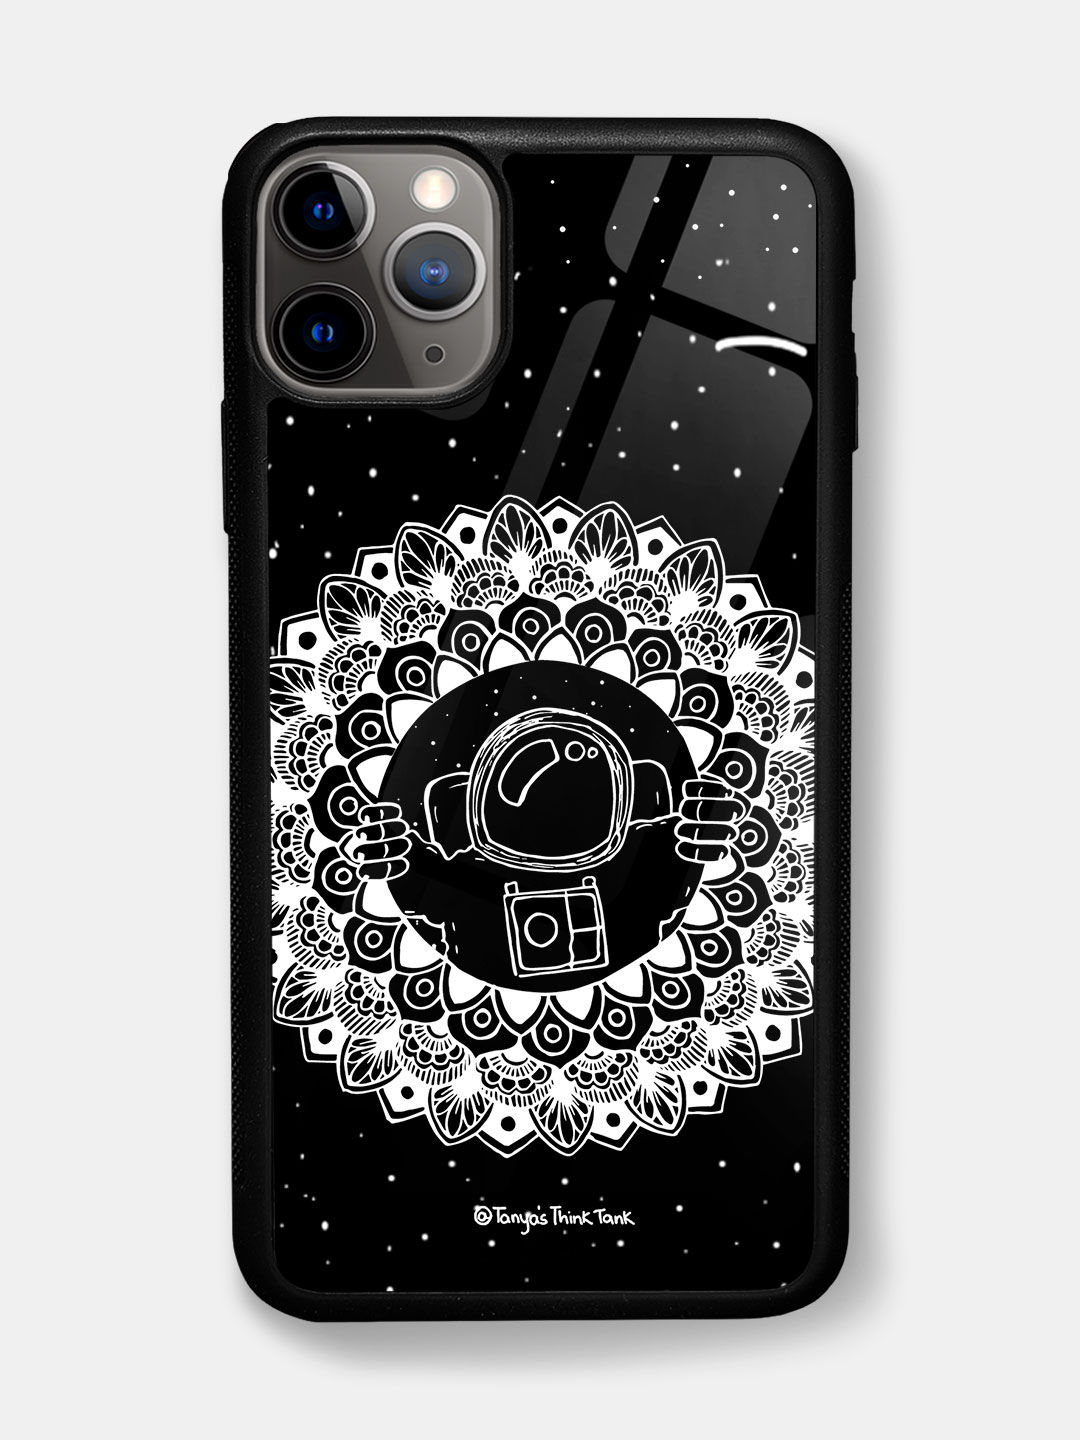 Buy Astronaut White - Glass Phone Case for iPhone 11 Pro Phone Cases & Covers Online